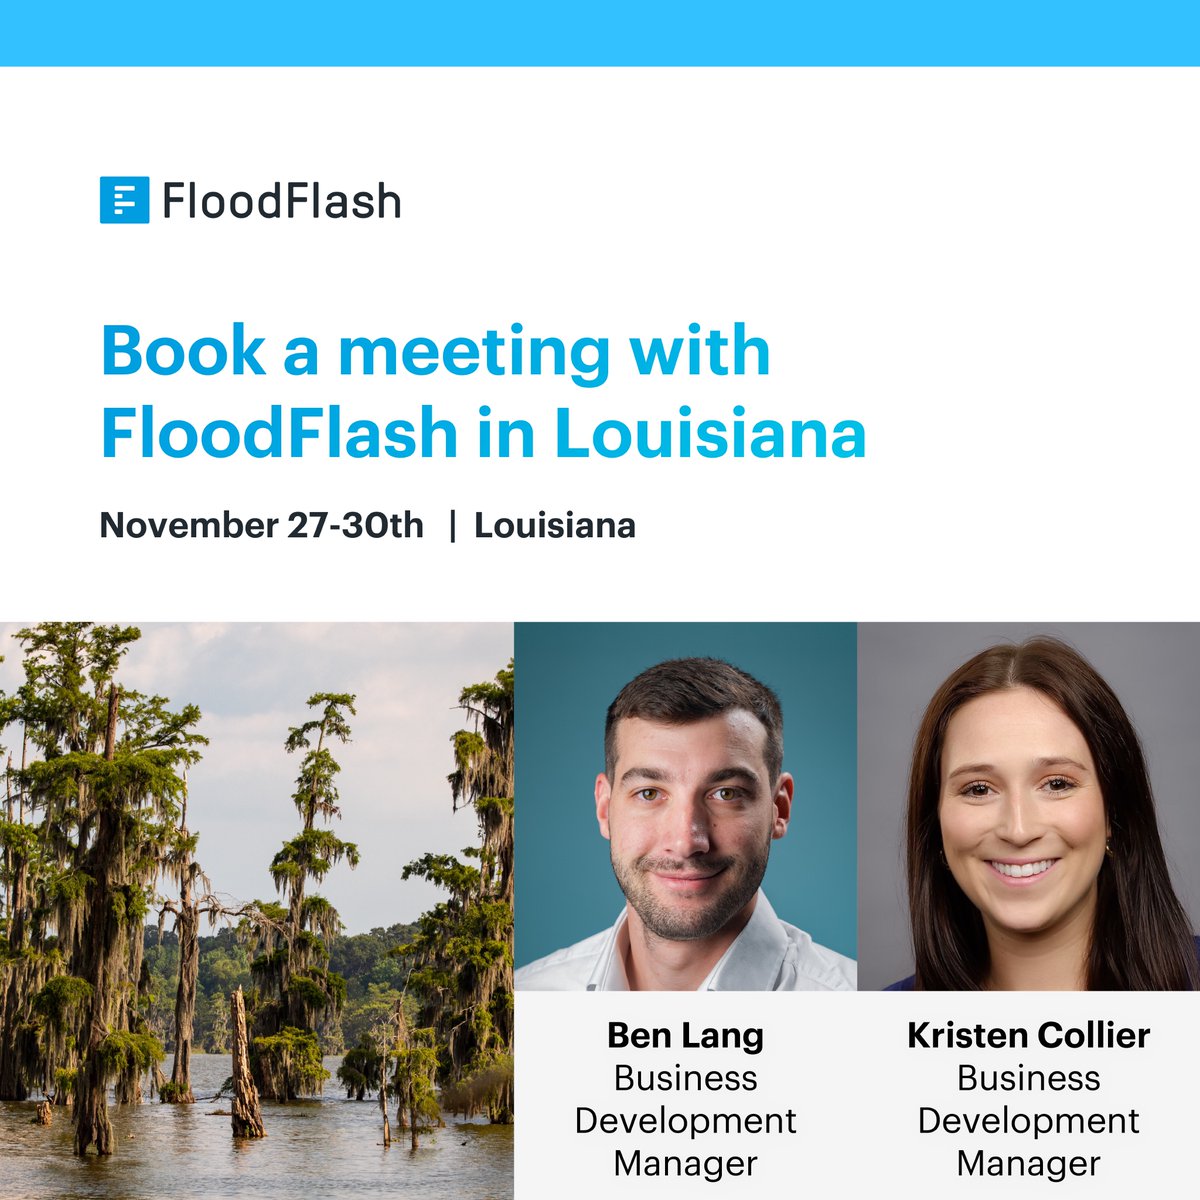 Louisiana has already experienced significant premium surges with some insurers retreating, largely due to the high risk of hurricanes and flooding.
 
FloodFlash experts Ben Lang and Kristen Collier are in Louisiana next week. To book a meeting, email getaquote@floodflash.co